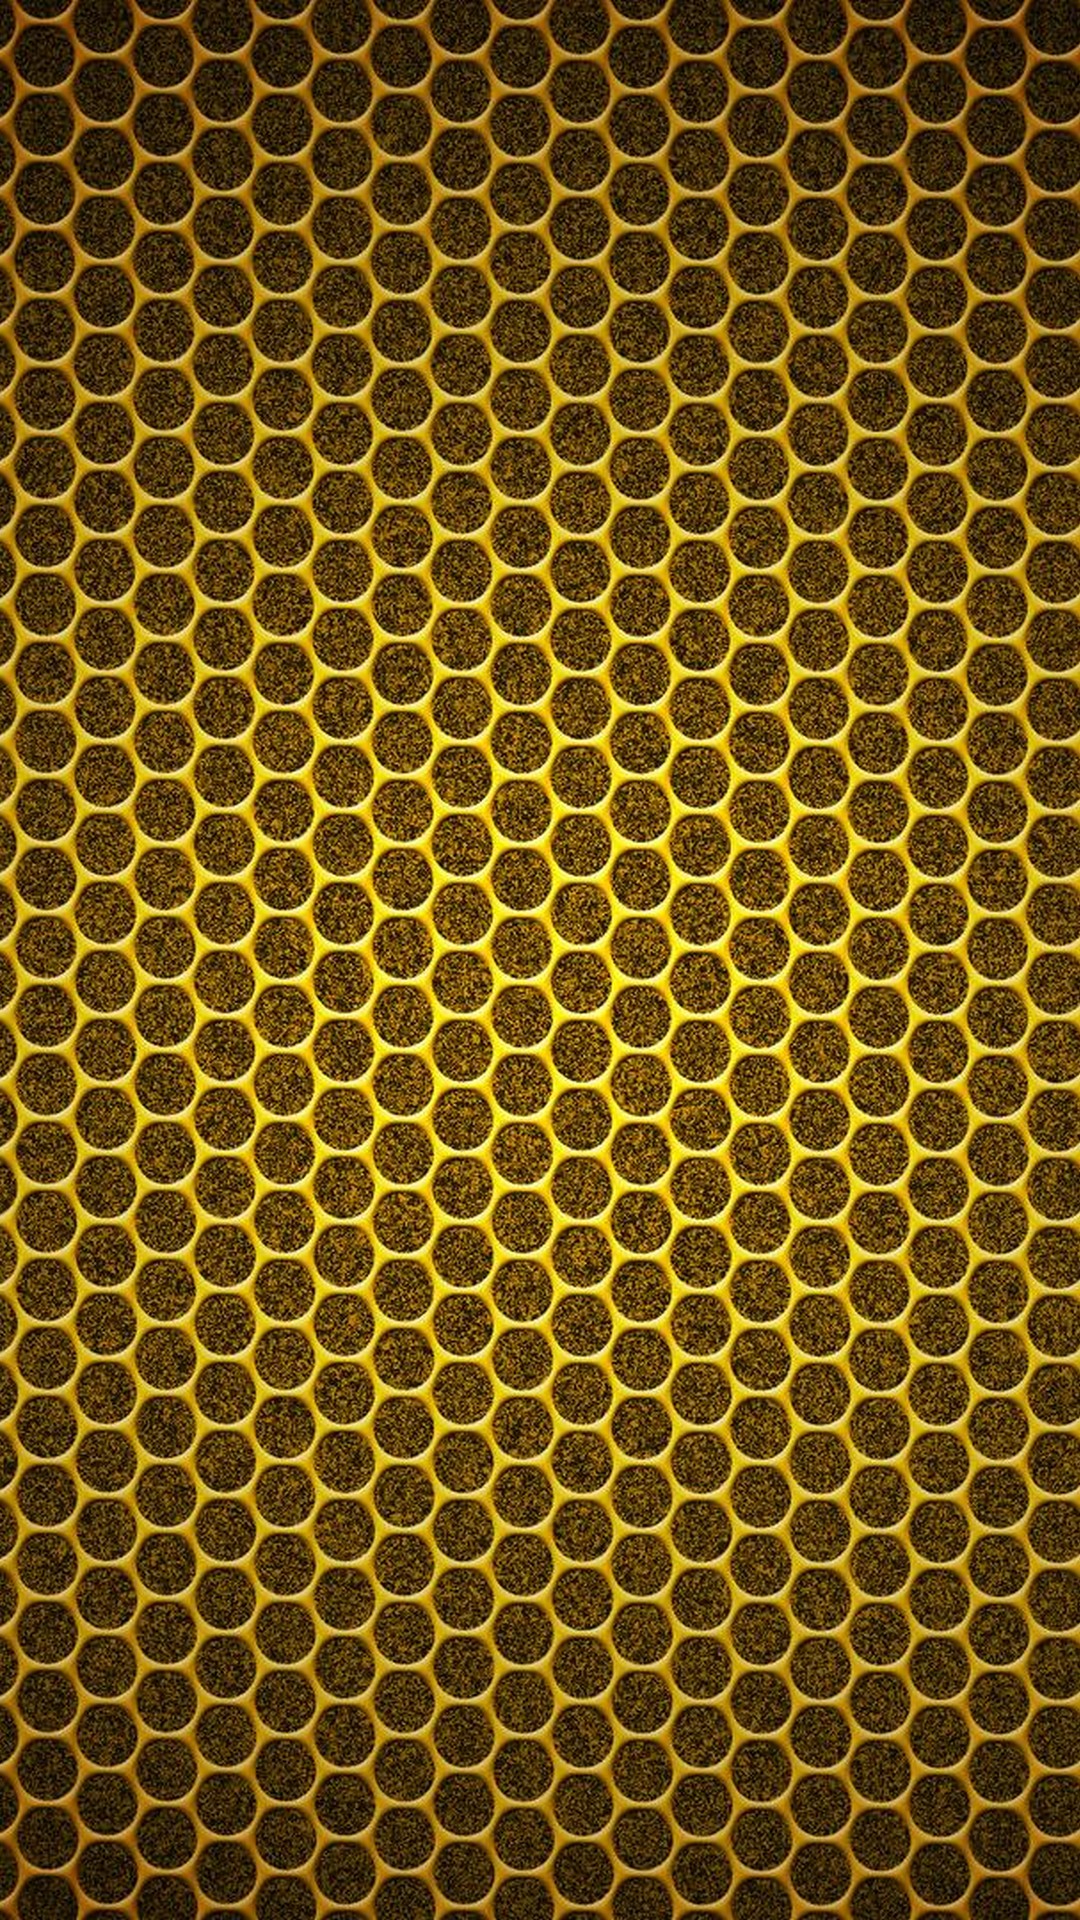 Gold Pattern Wallpaper For Android with HD resolution 1080x1920